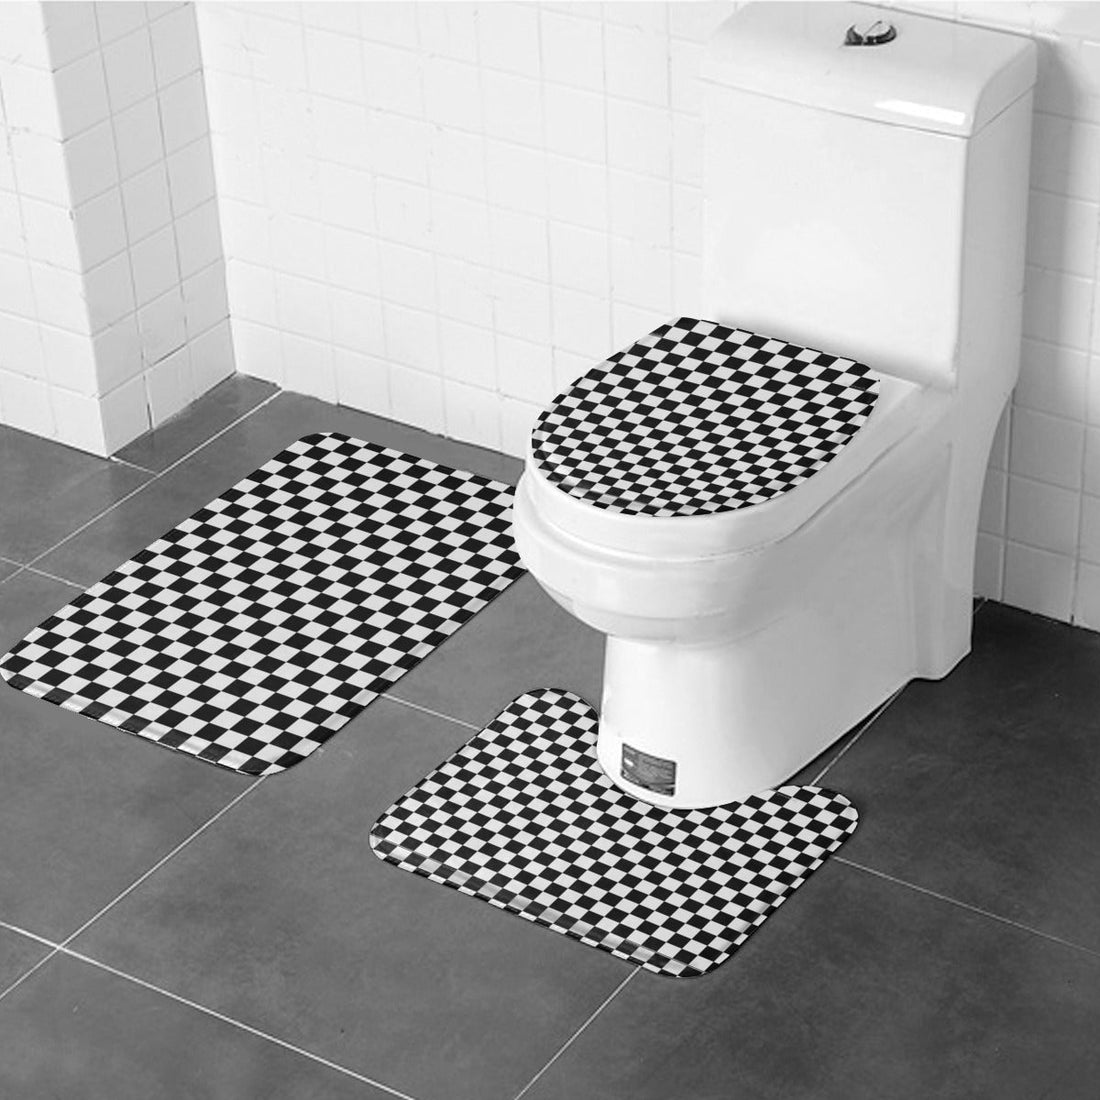 Effortless Elegance: Transform Your Bathroom with the Flannel-Inspired Black and White Three-Piece Set Home-clothes-jewelry